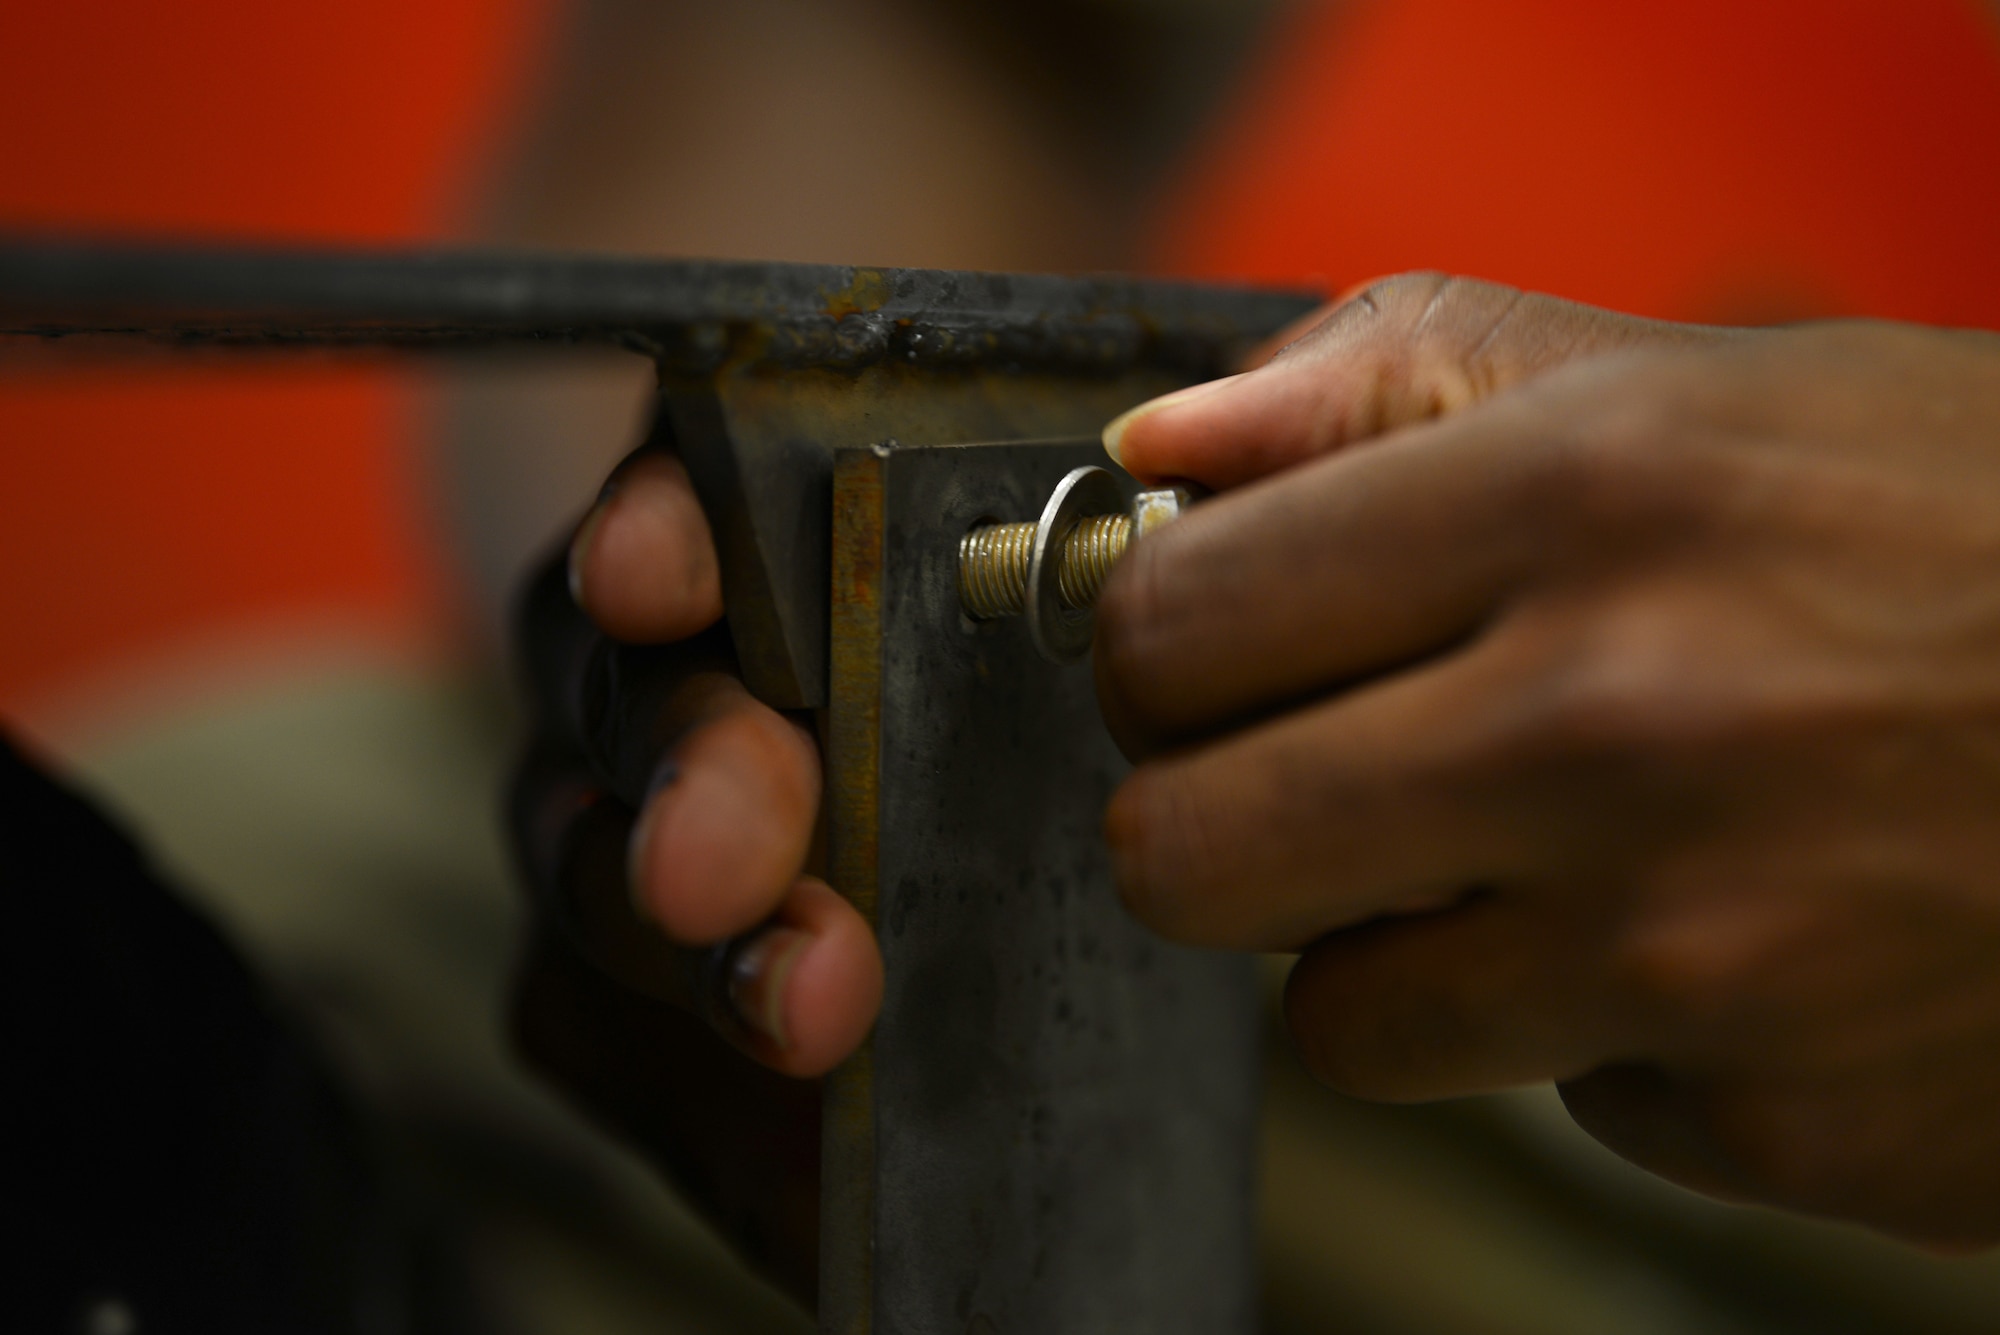 U.S. Air Force Airman Basic Jeffery Jenkins, aircraft metals technology technician from the 31st Maintenance Squadron, tightens a screw into the MJ-1 STEP, July 1, 2019 at Aviano Air Base, Italy. The 31st MXS Performs transient alert services, crash recovery and operates the regional Type IIB Precision Measurement Equipment Laboratory. (U.S. Air Force photo by Airman 1st Class Ericka A. Woolever)